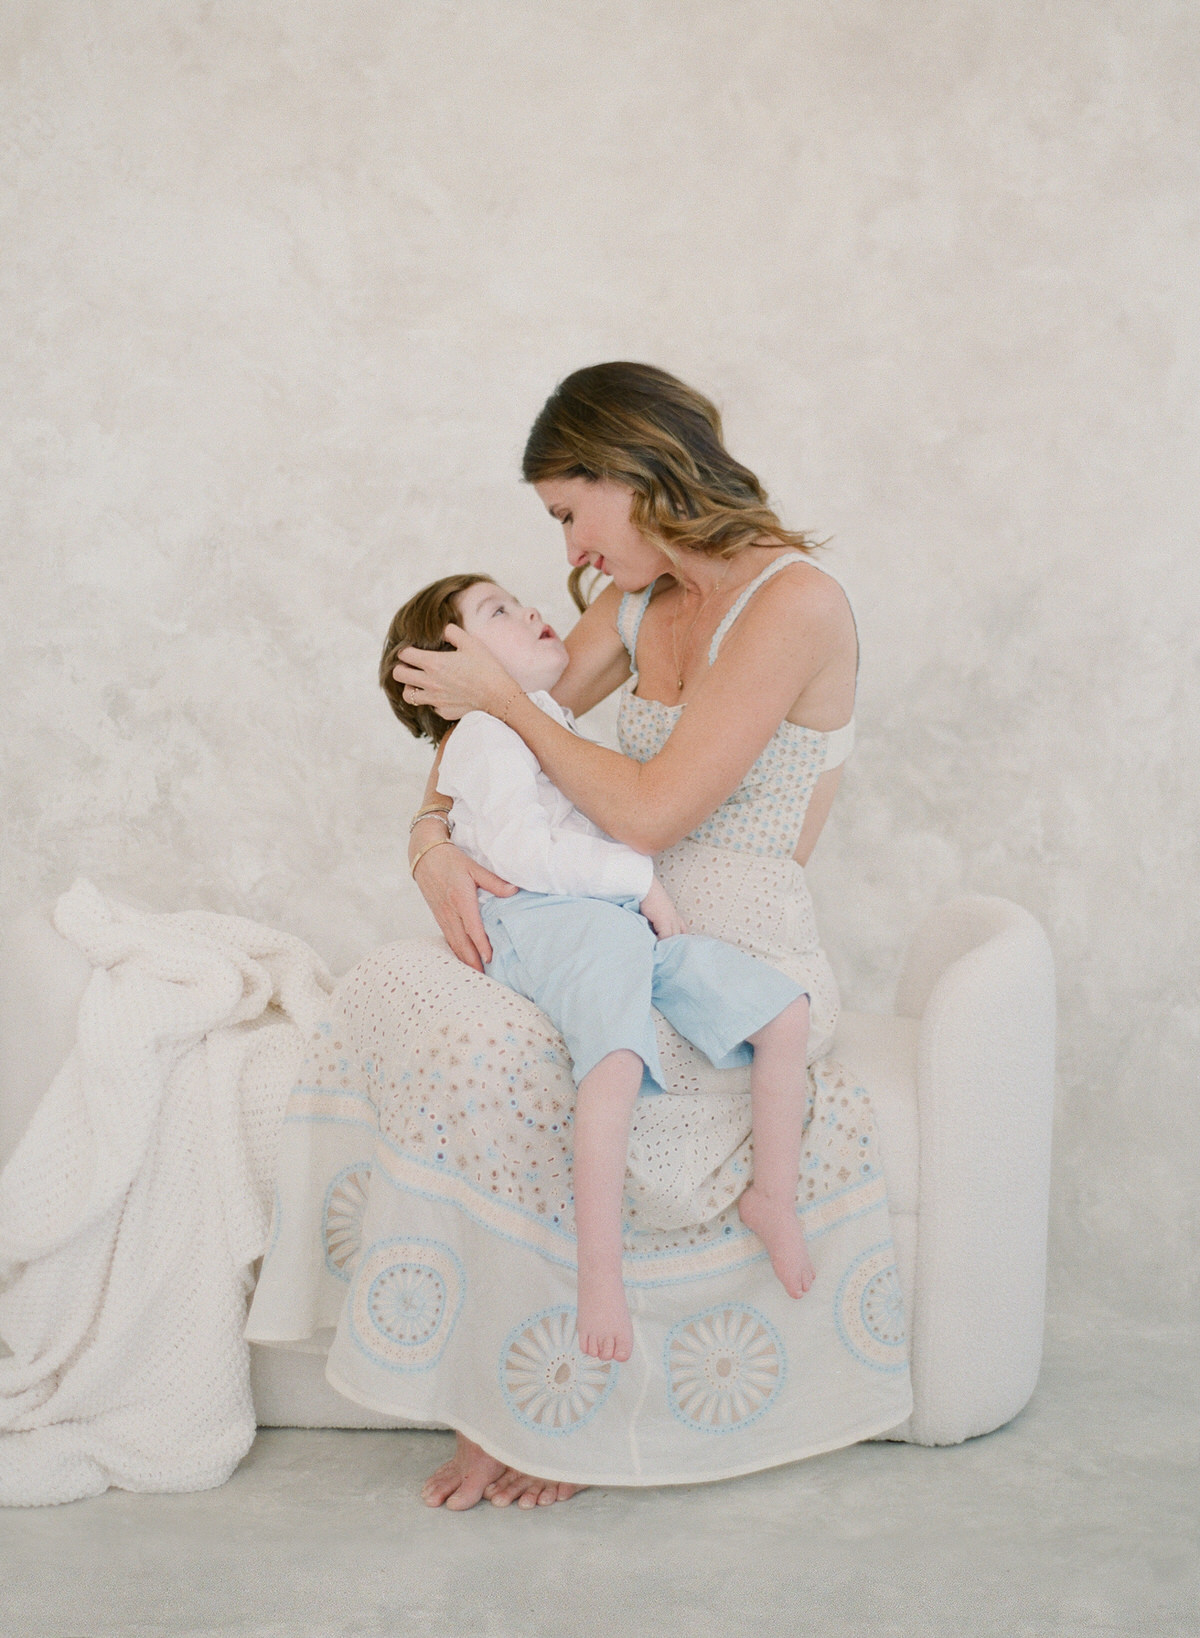 Charlotte Motherhood Photography on Film - Mother holding son - Portraiture with children with disabilities - California Motherhood Studio Session - Kent Avenue Photography - www.kentavenuephotography.com